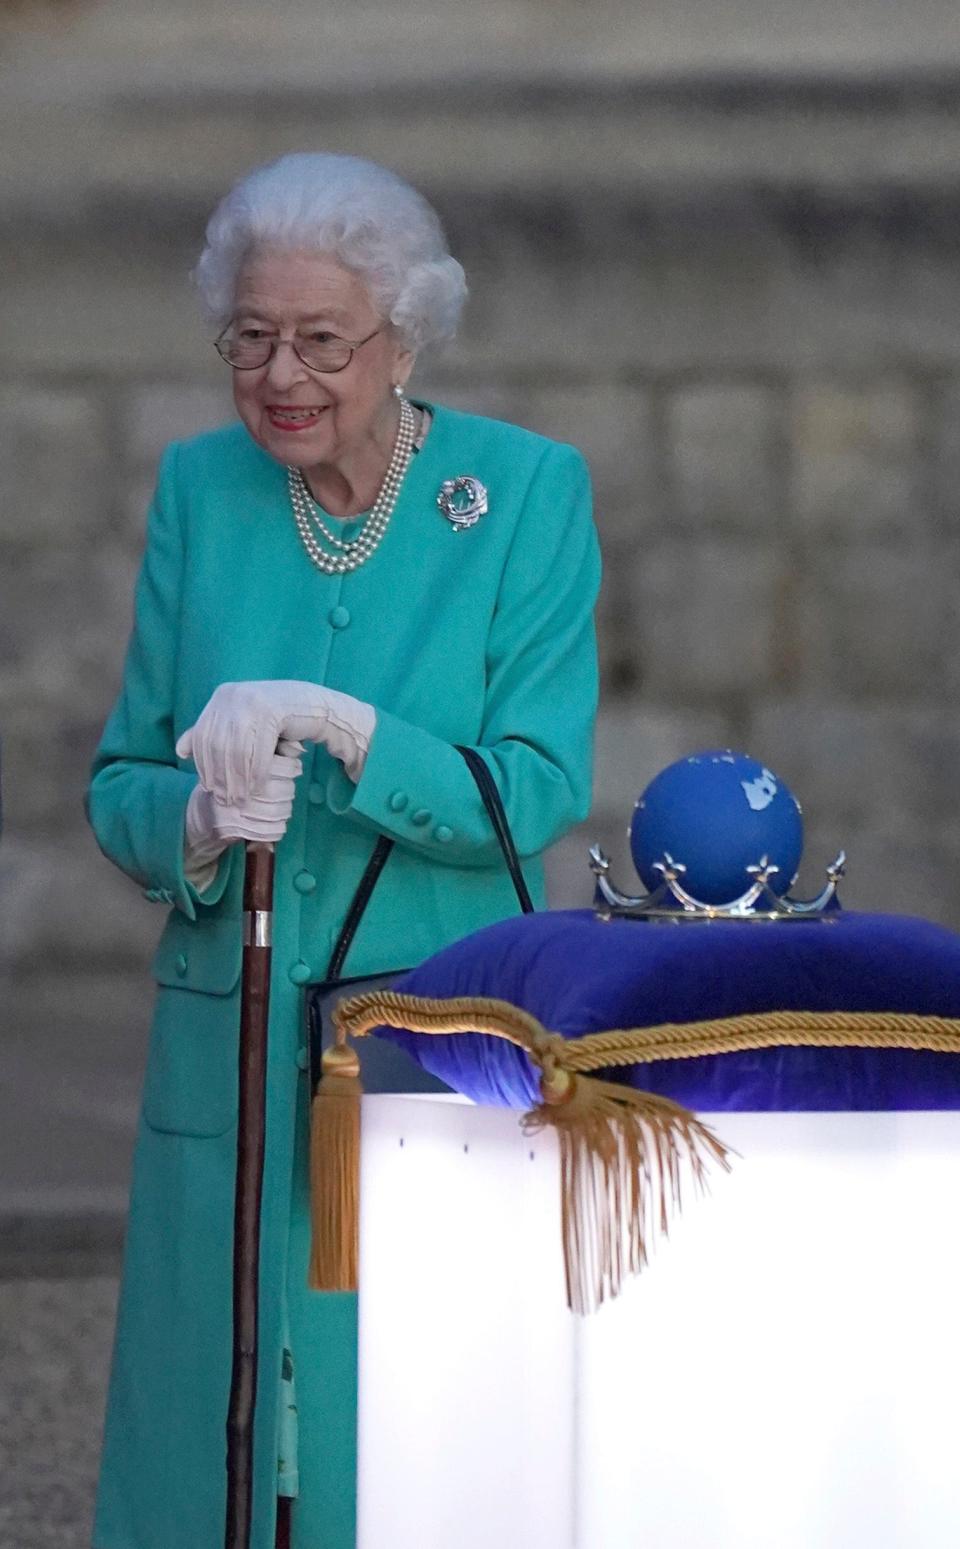 The Queen standing and smiling in a minty jade green long coat with buttons and pockets. She has on pearls, a round brooch, a black handbag, and is resting on a walking cane.